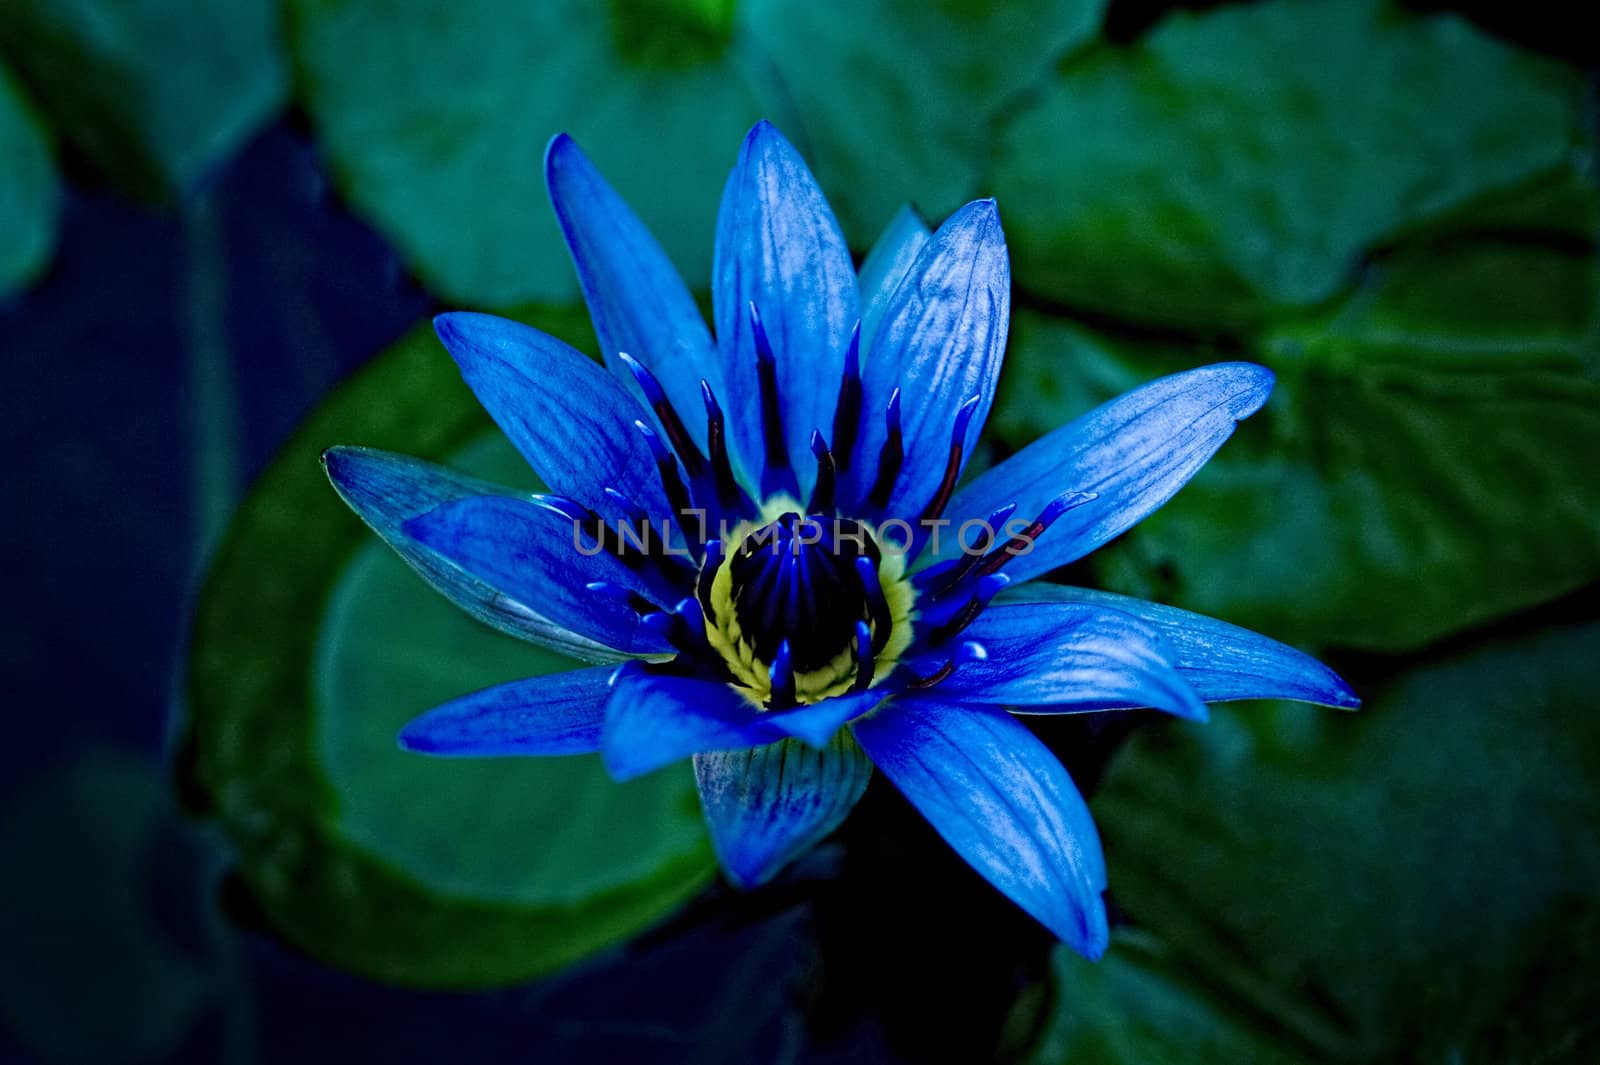 An image of a beautiful image of a purple/blue and yellow water lily with green leaves in background